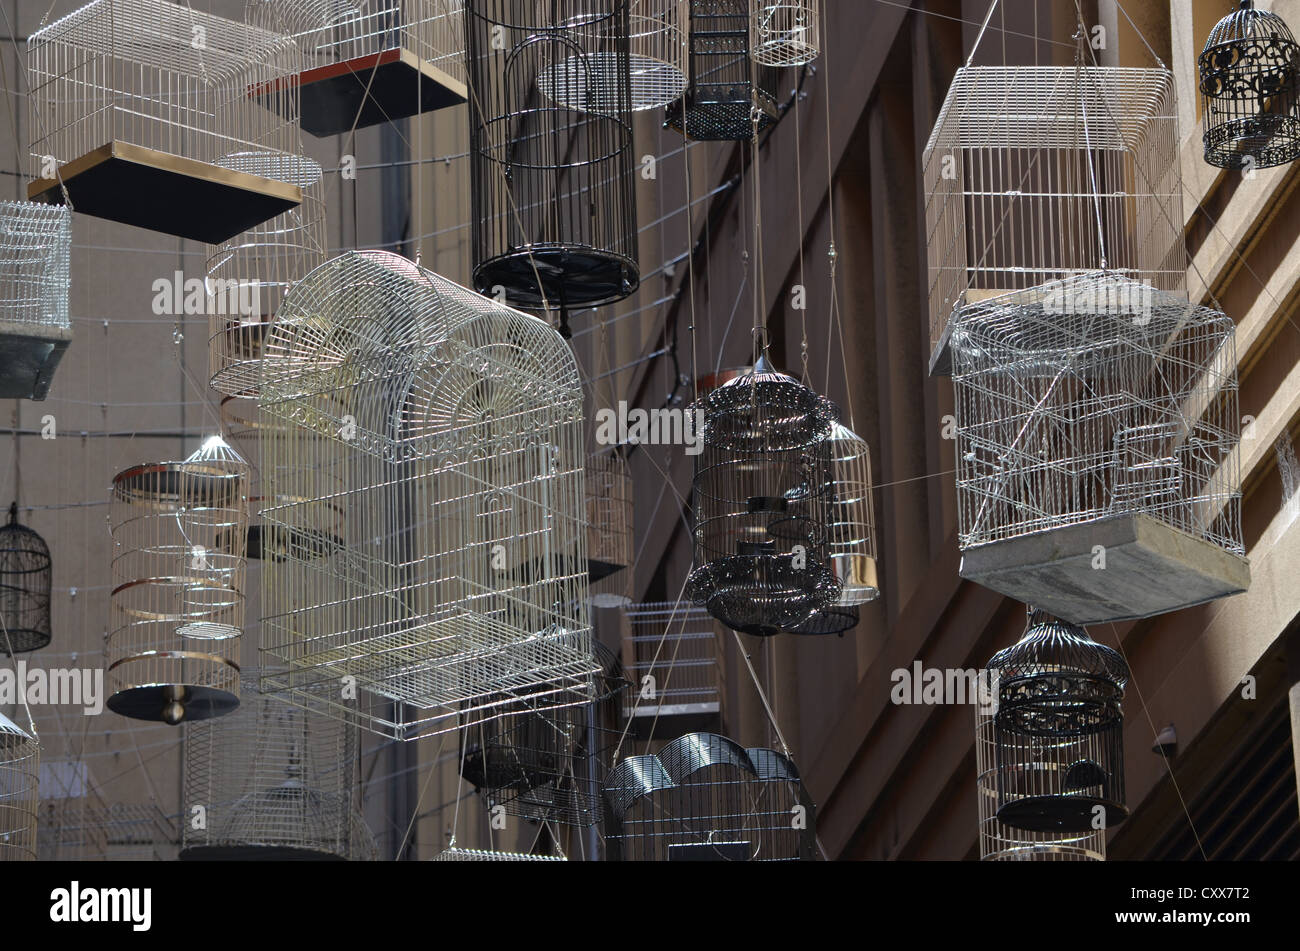 an angular exhibition of empty birdcages with an urban backdrop Stock Photo